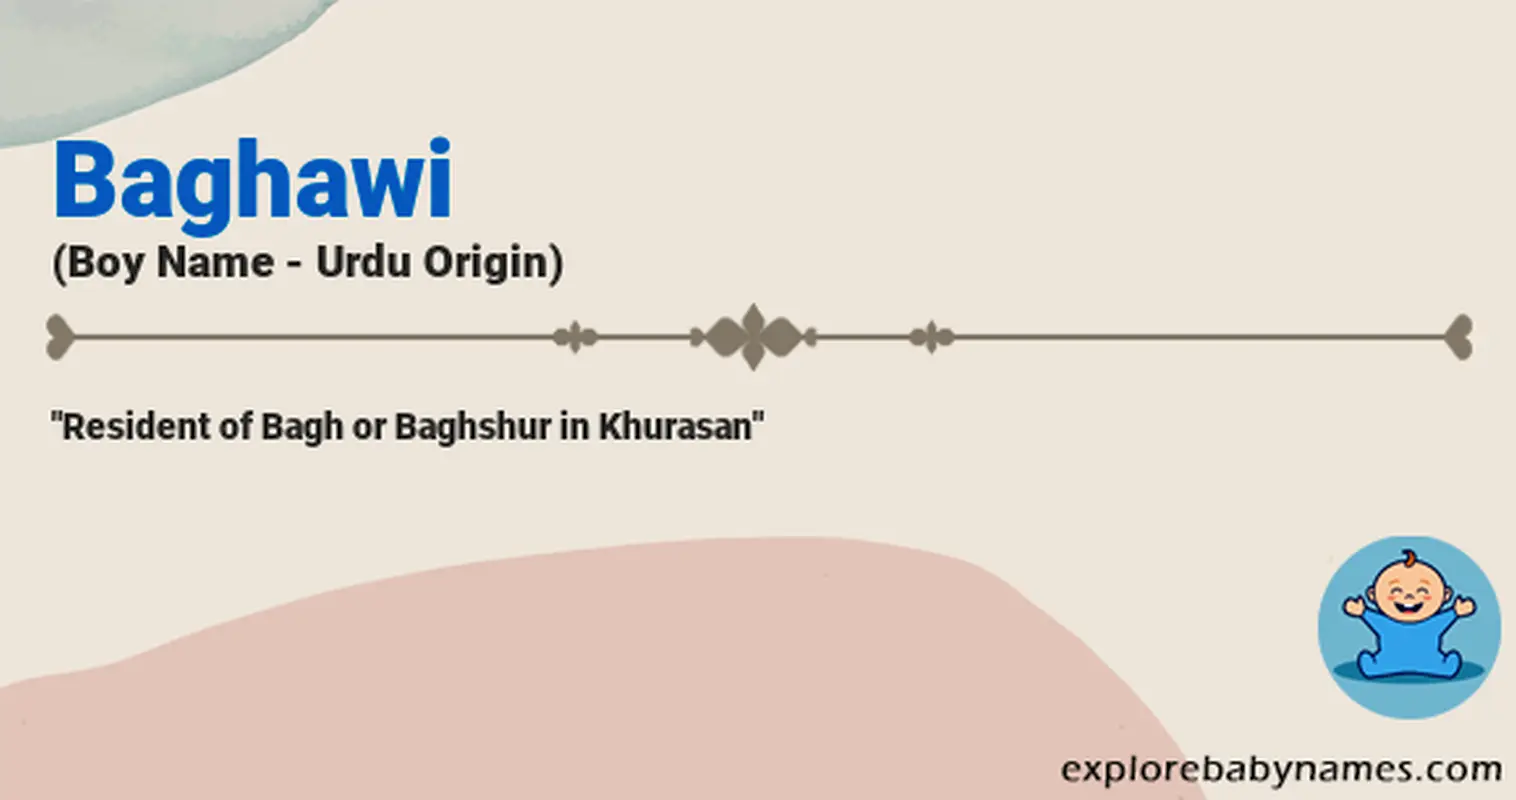 Meaning of Baghawi